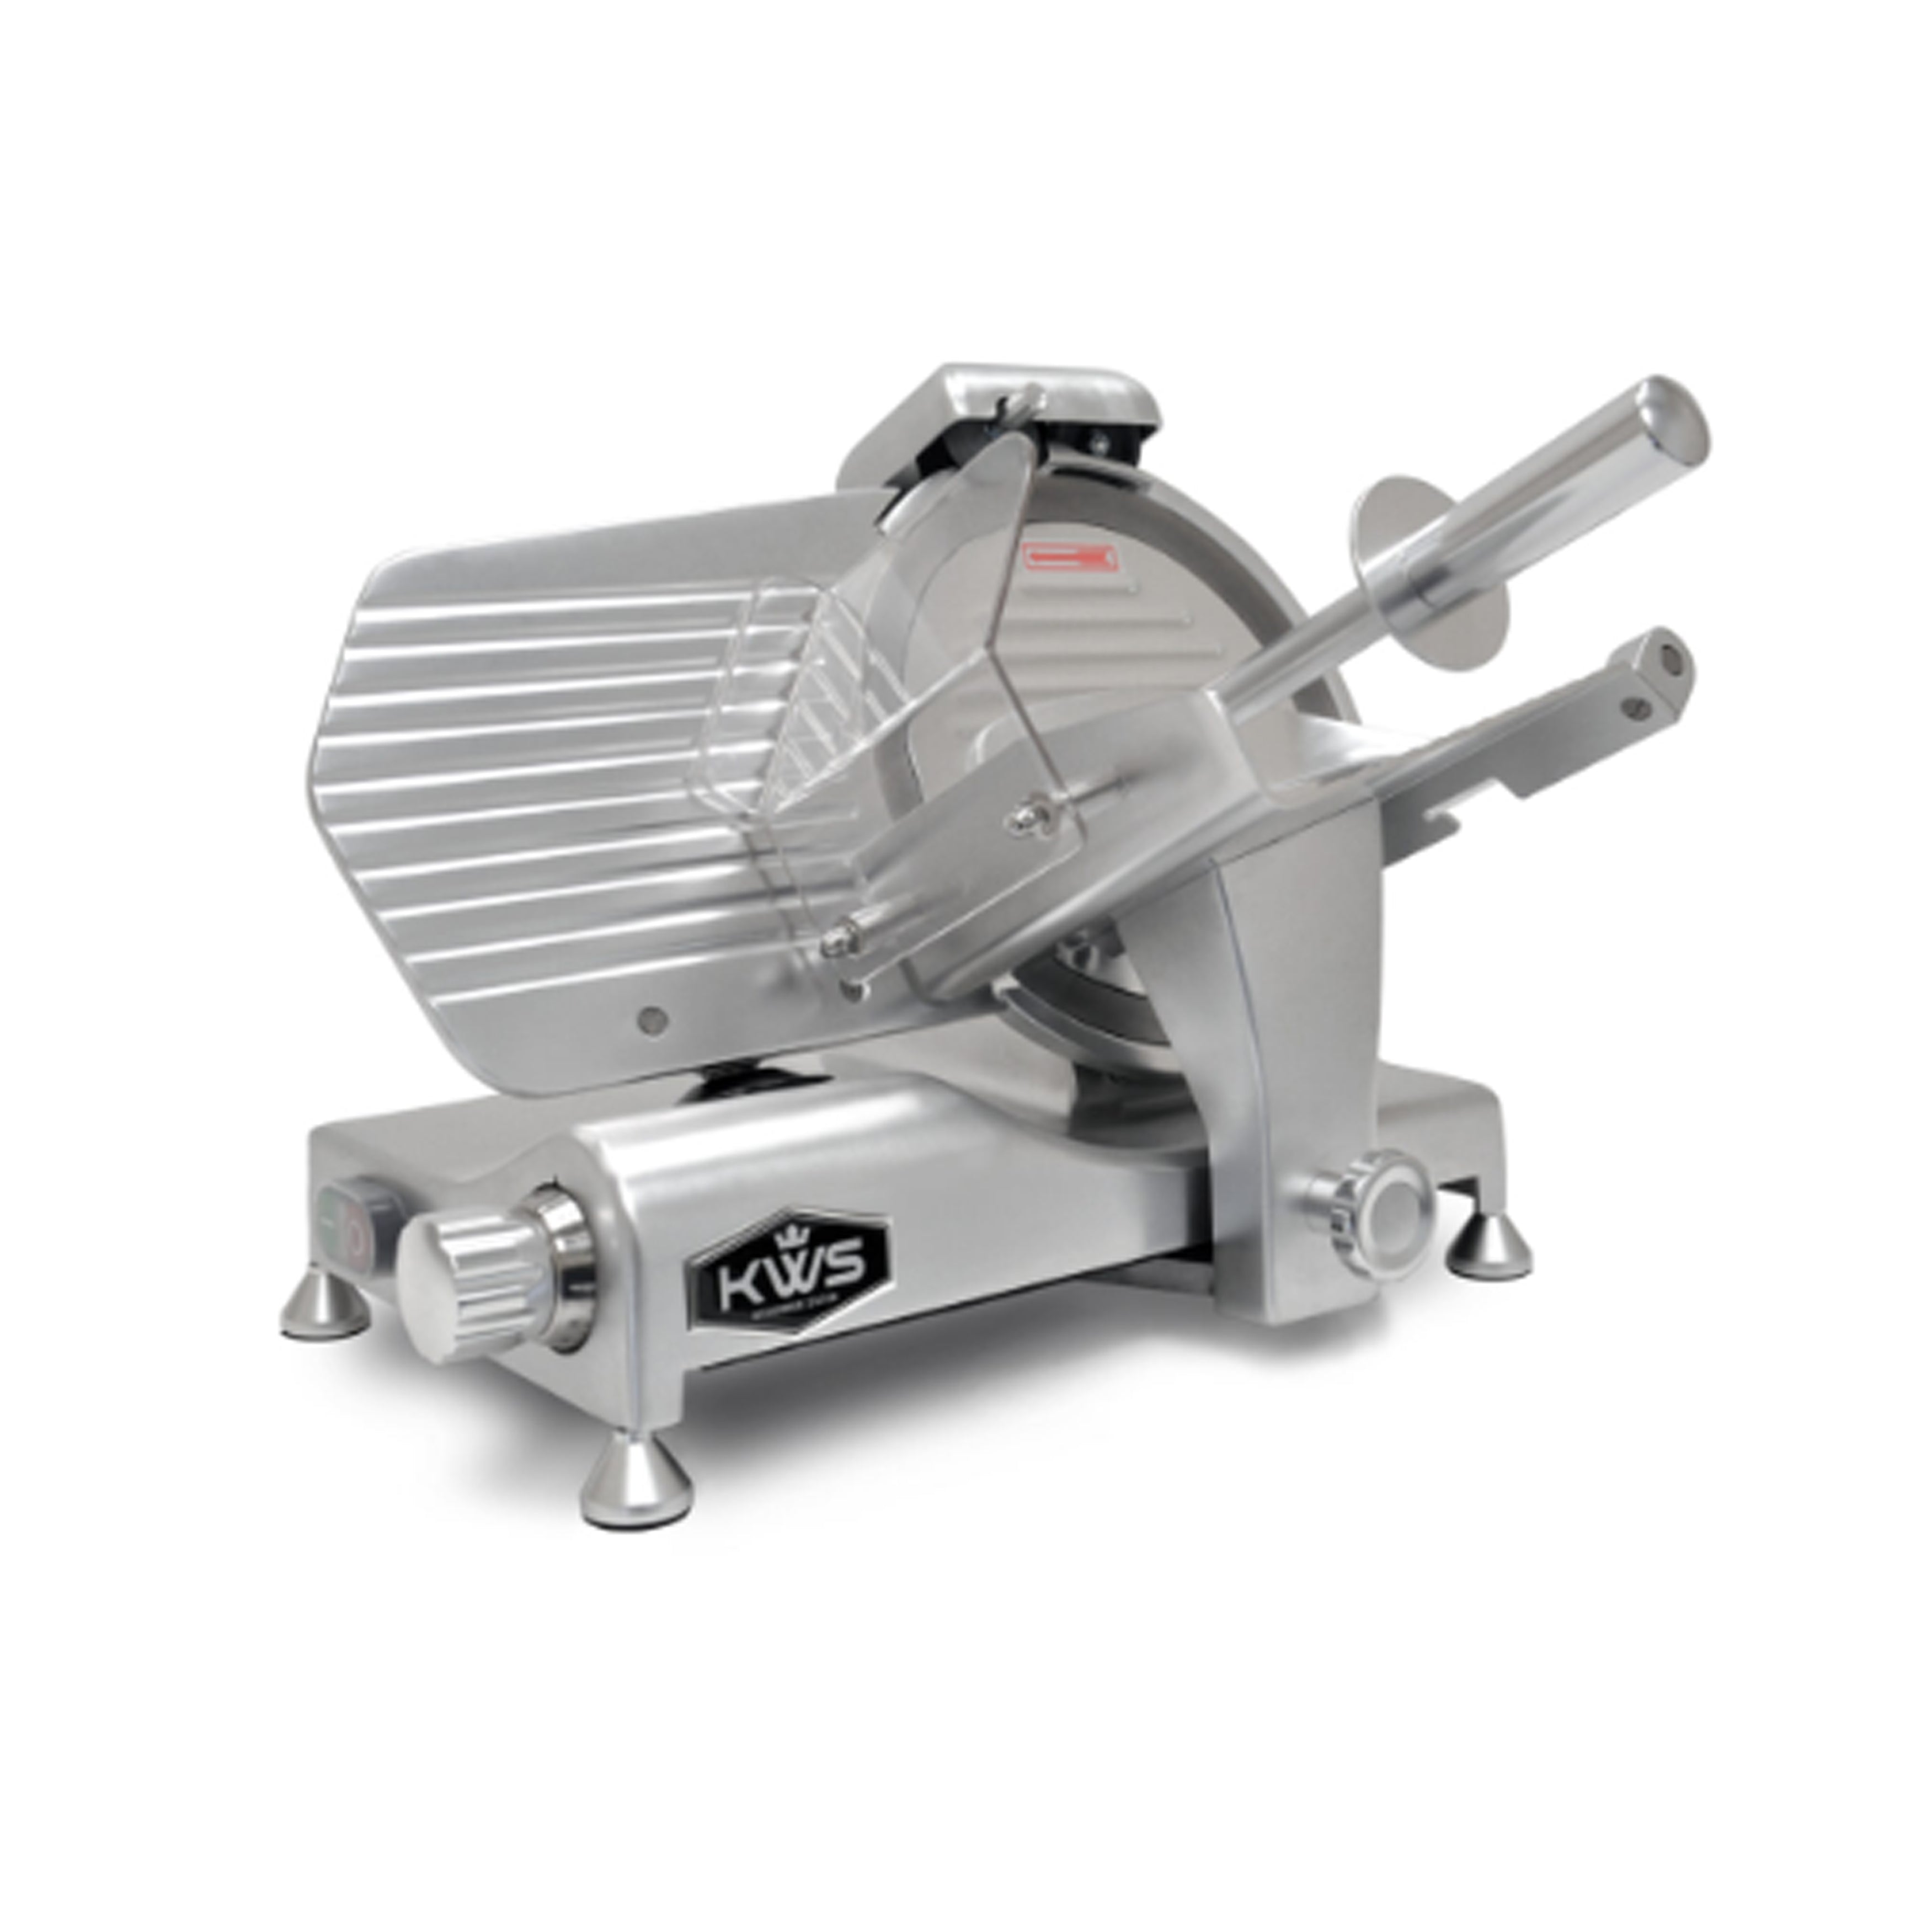 KWS - MS-10DS, Commercial 10″ Electric Meat Slicer Anodized Aluminum Stainless Steel Blade